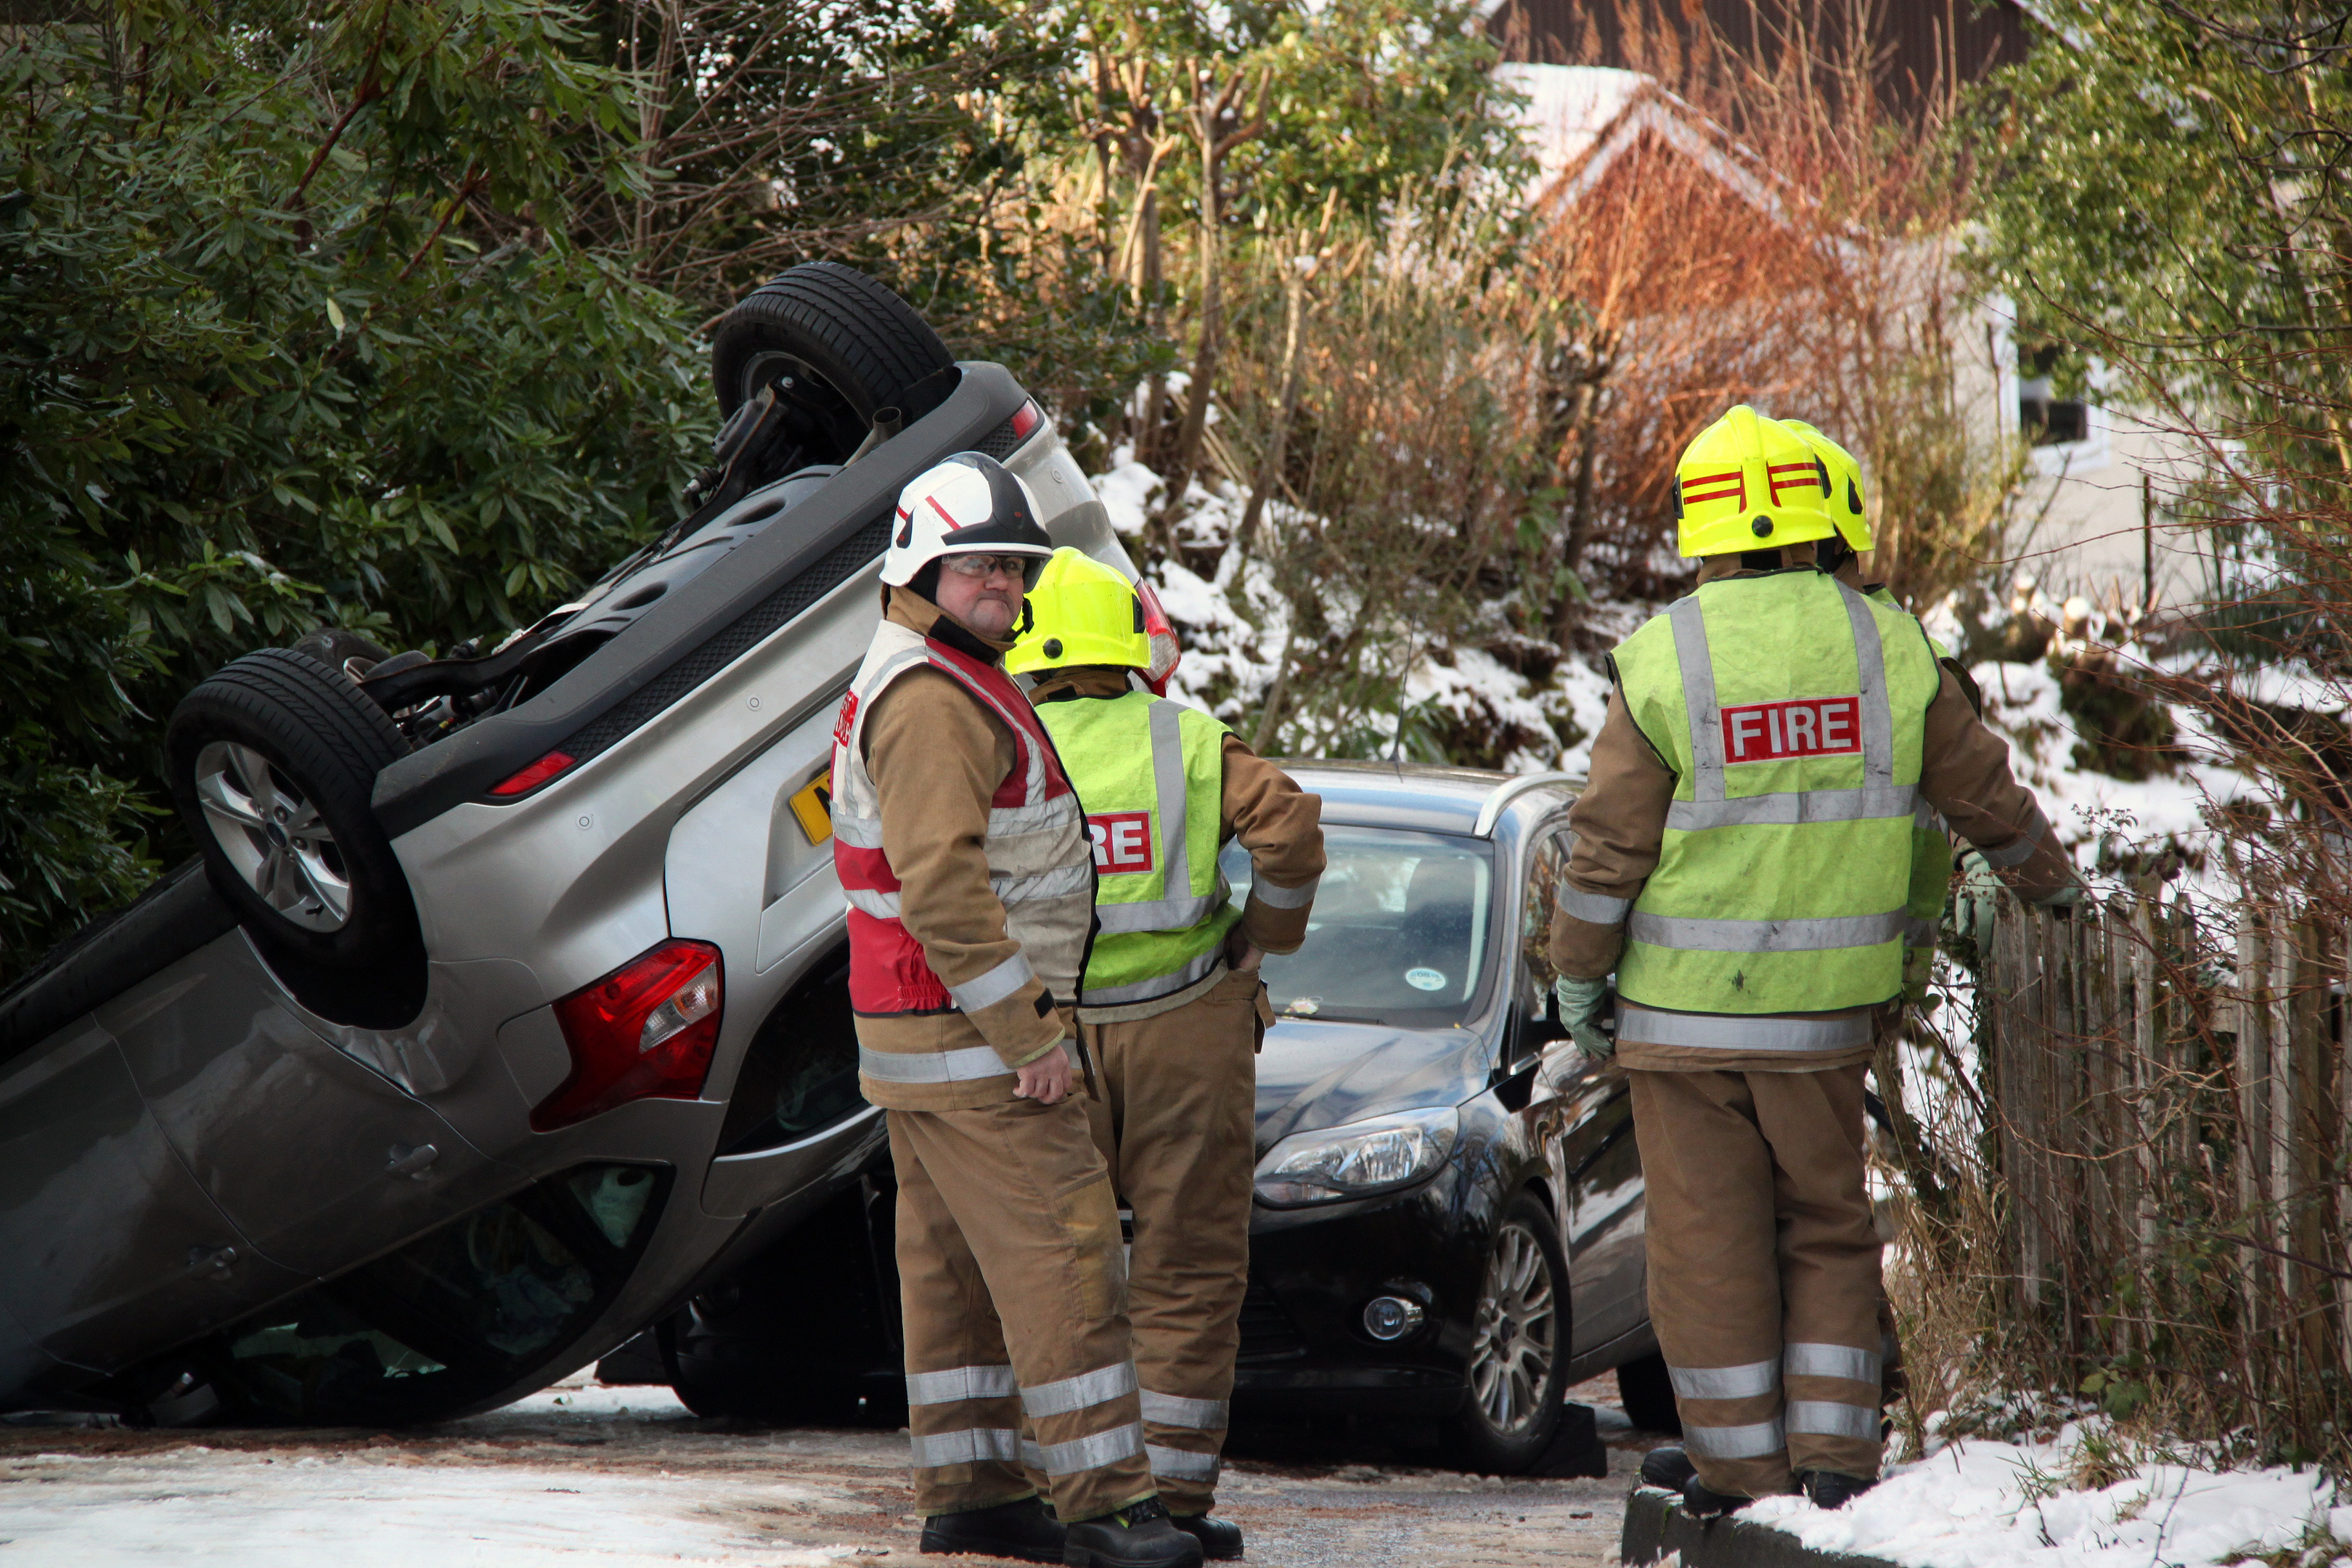 Emergency services were called to the crash on Ashburn Lane in Fort William earlier this afternoon